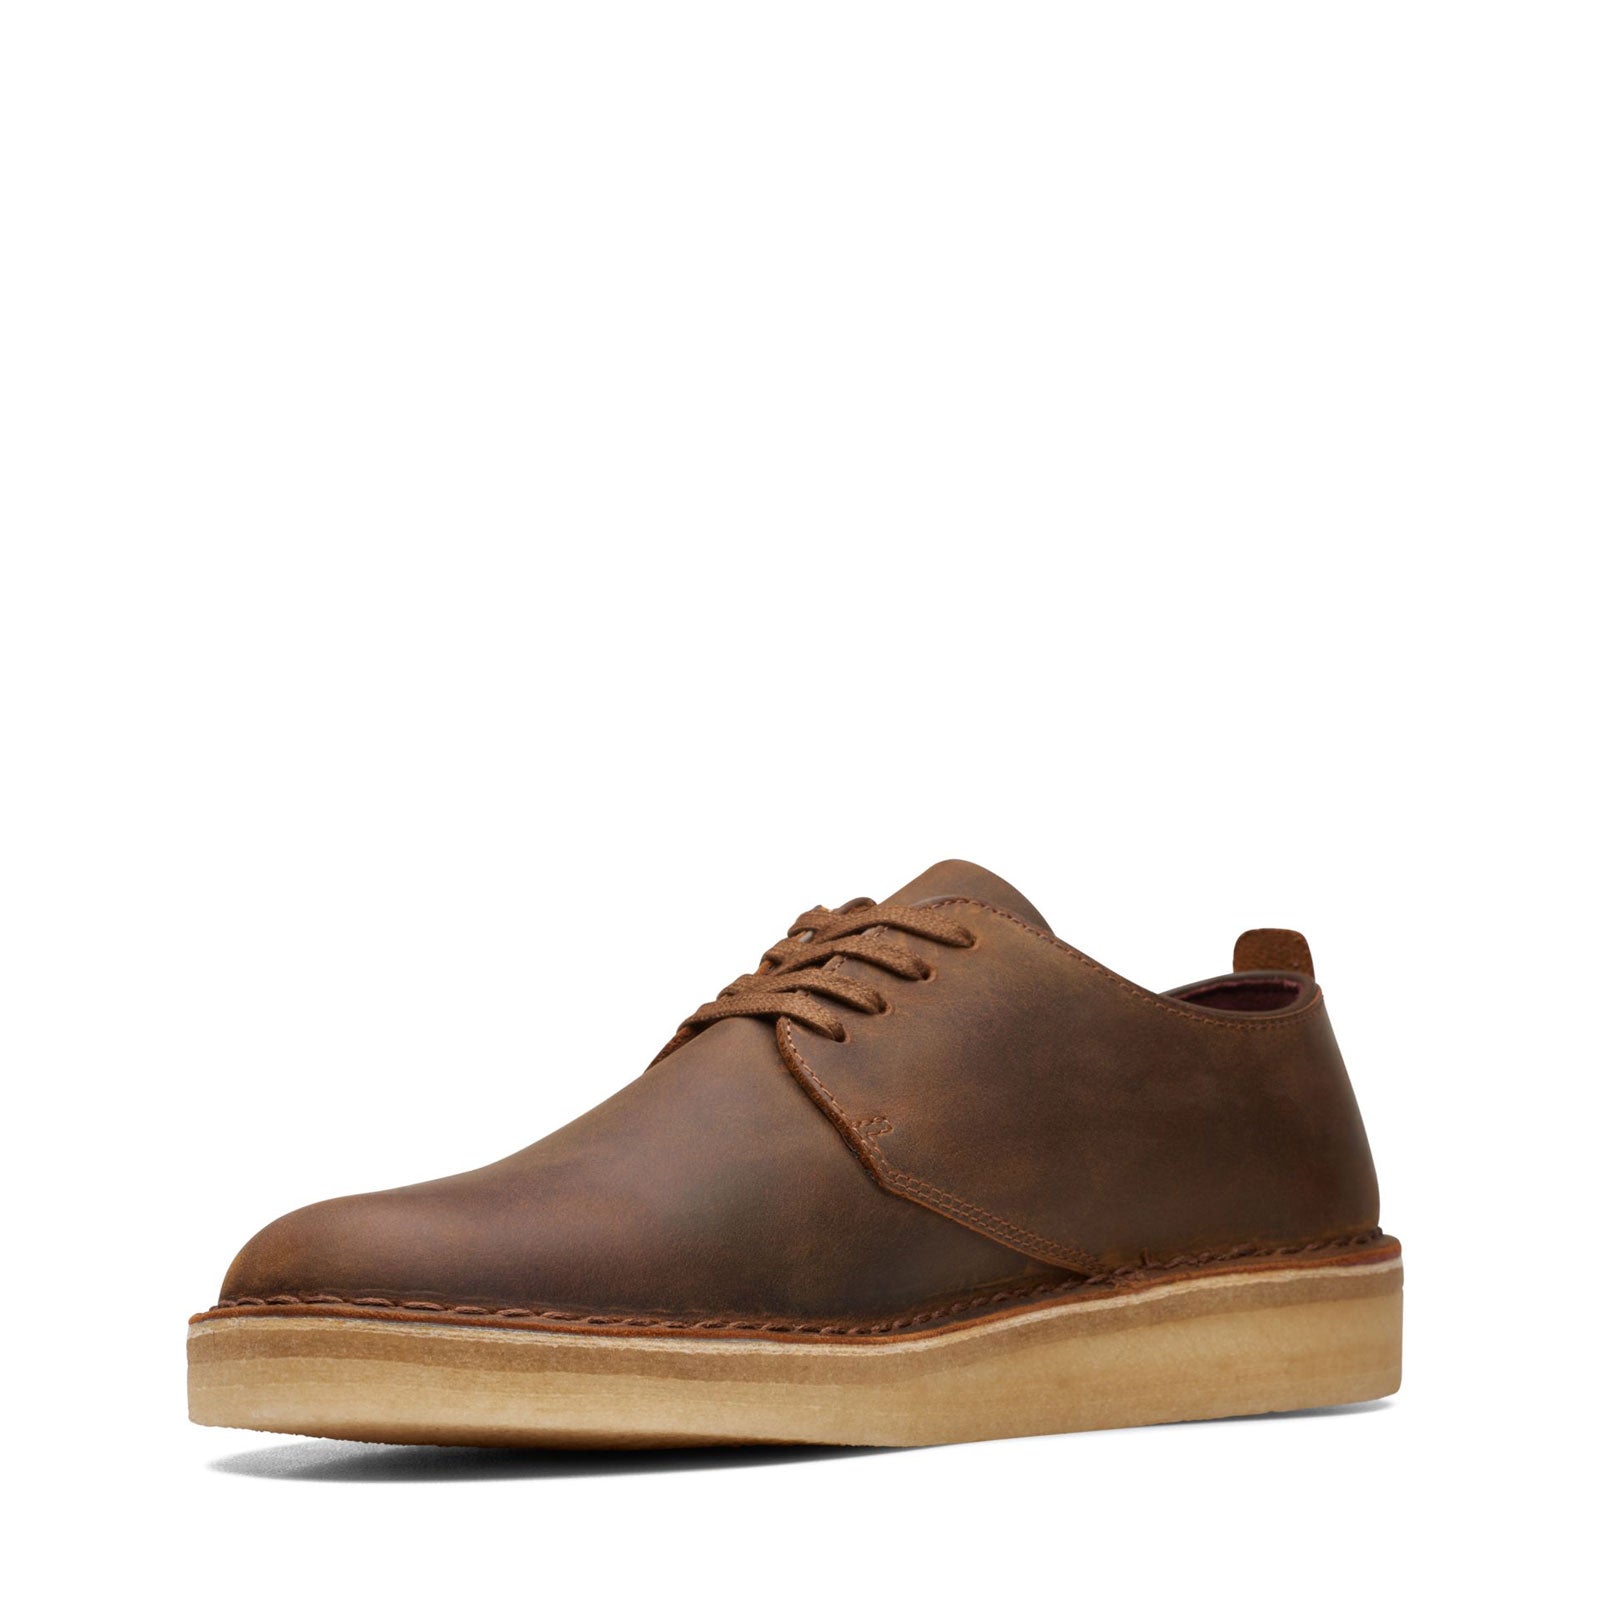 Clarks 71493 (Beeswax) Milano Shoes